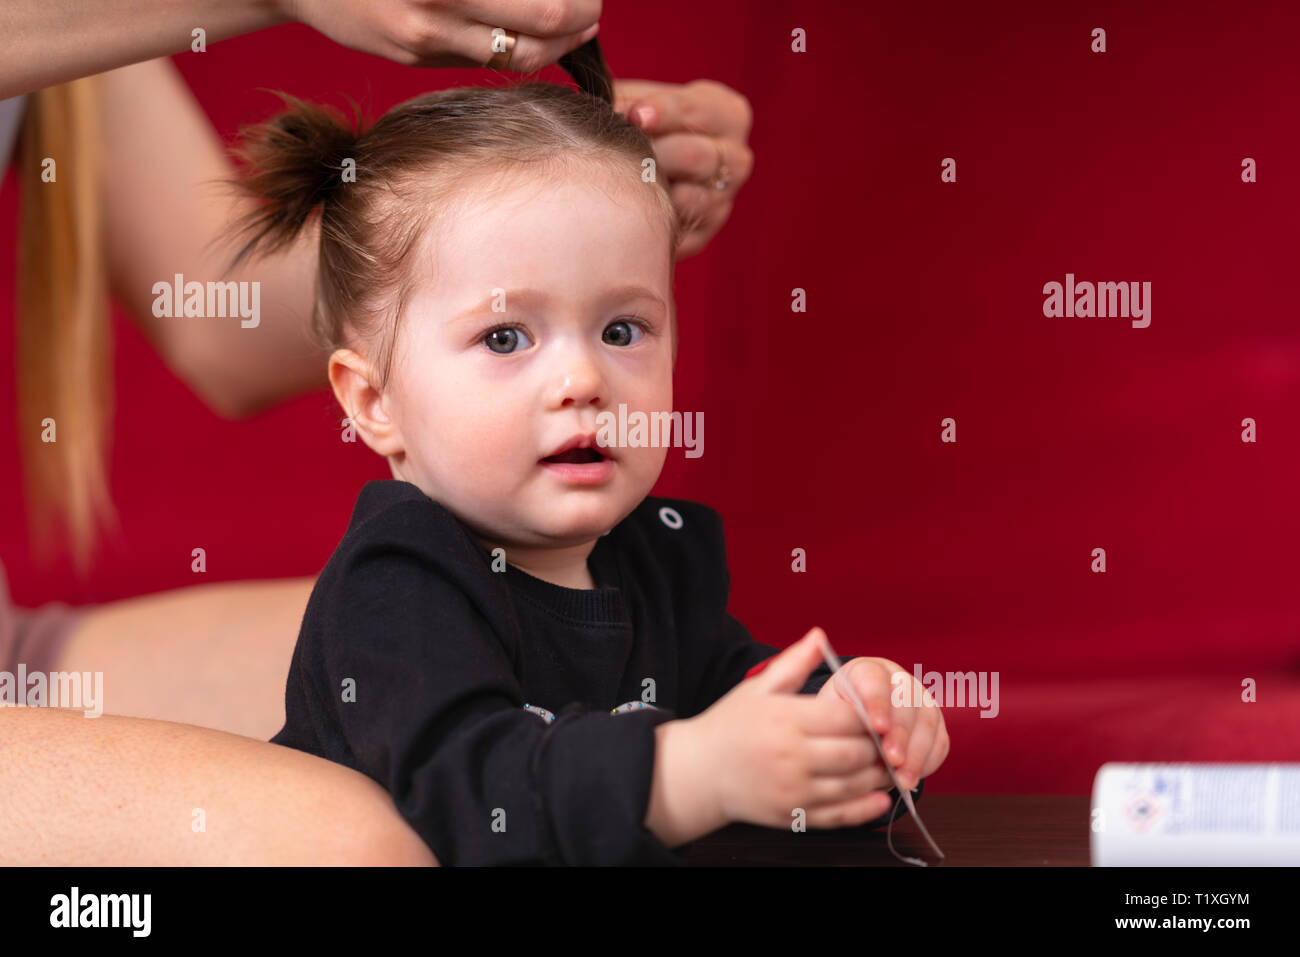 Mother braids her young daughters hair at home, against red background. Little cute baby girl in black shirt looking at camera. Close-up portrait with Stock Photo